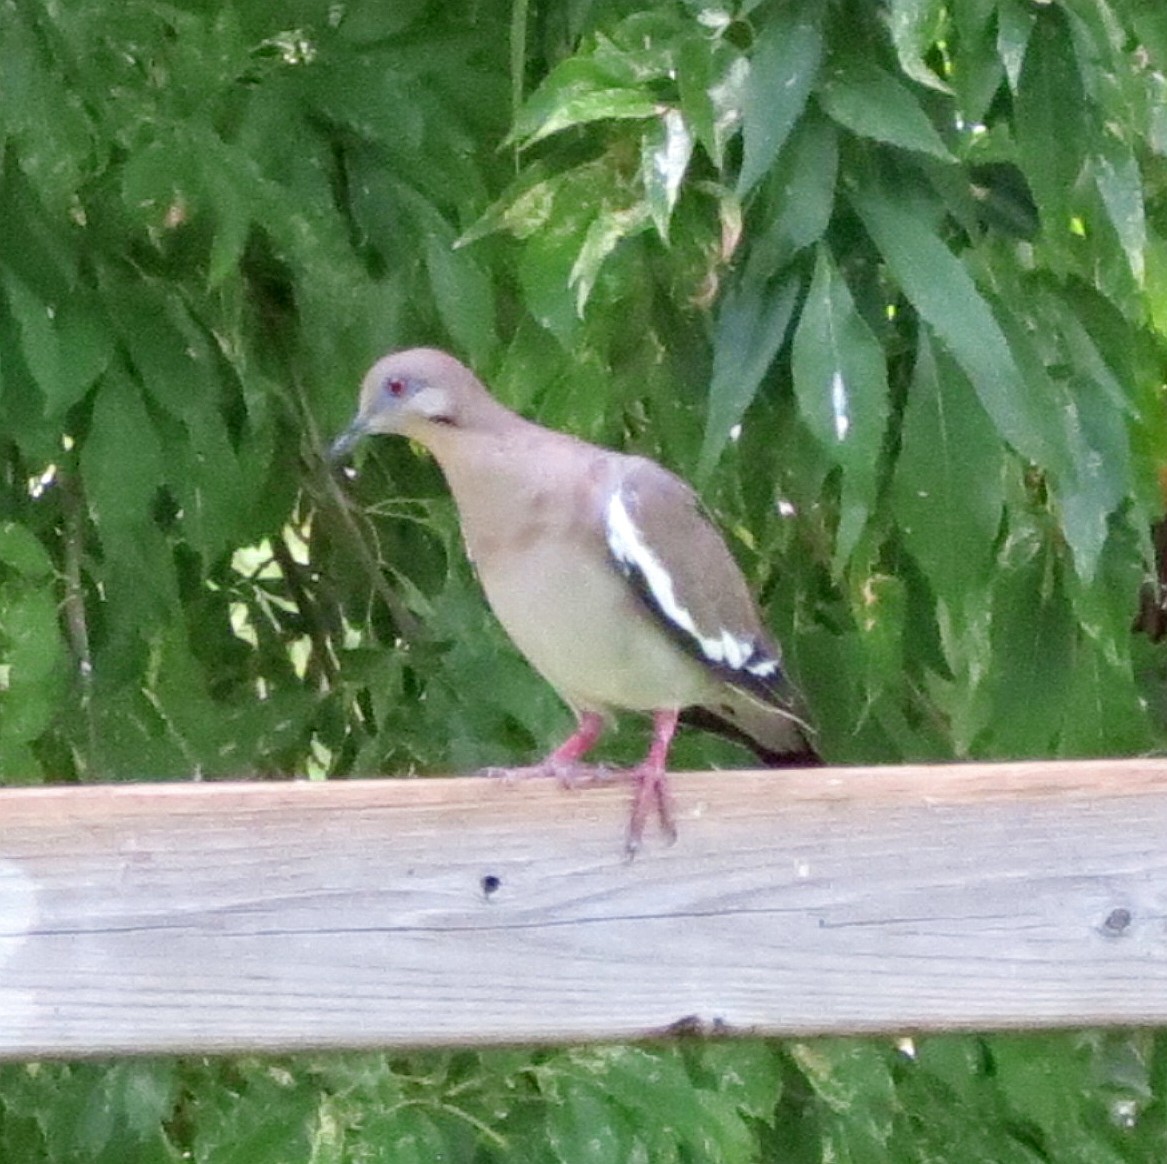 Image of White-winged dove